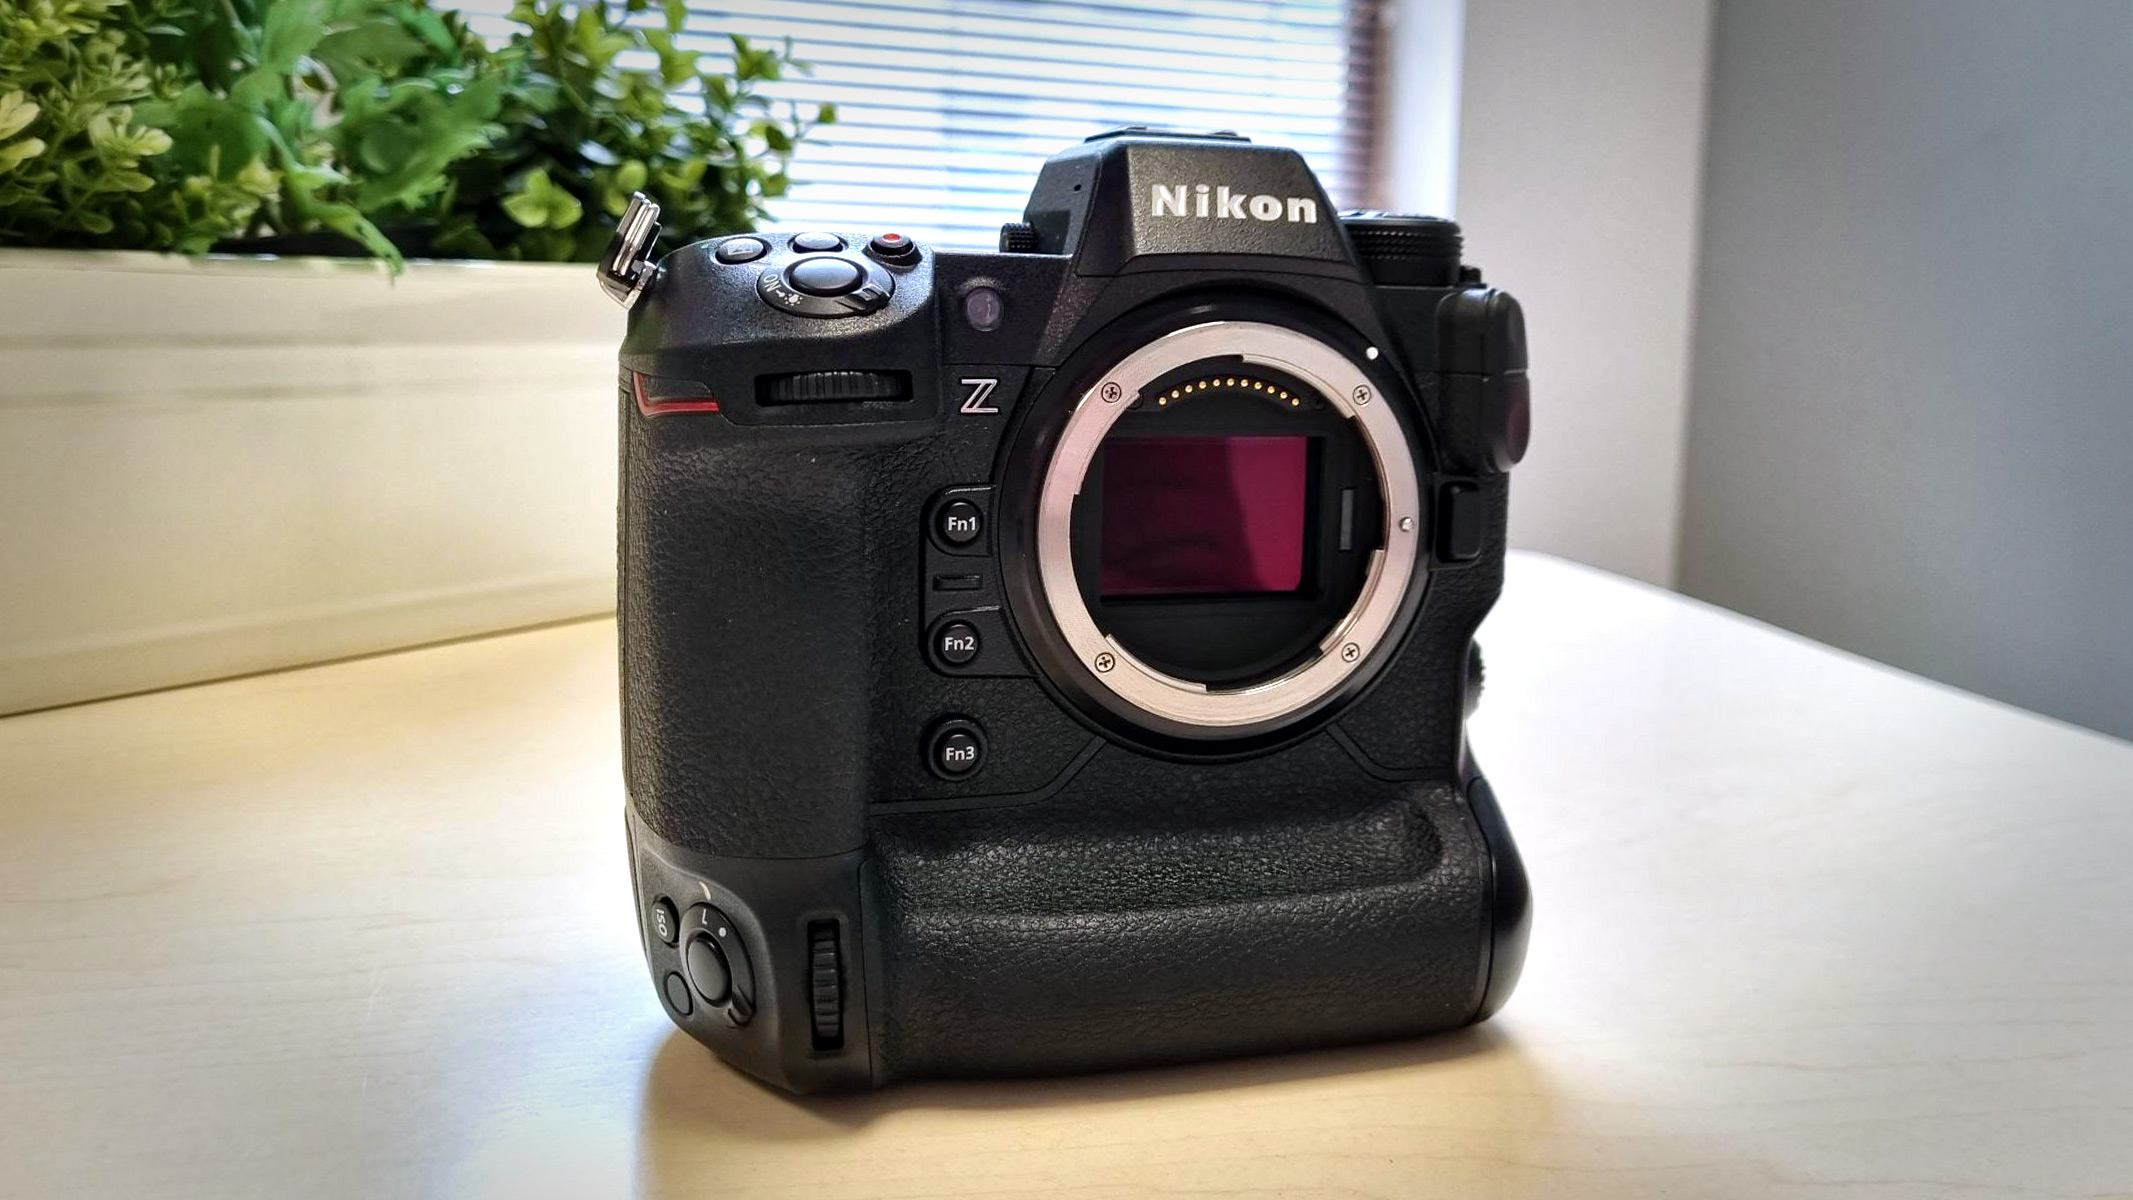 Nikon Z9 on a wooden table in front of a window